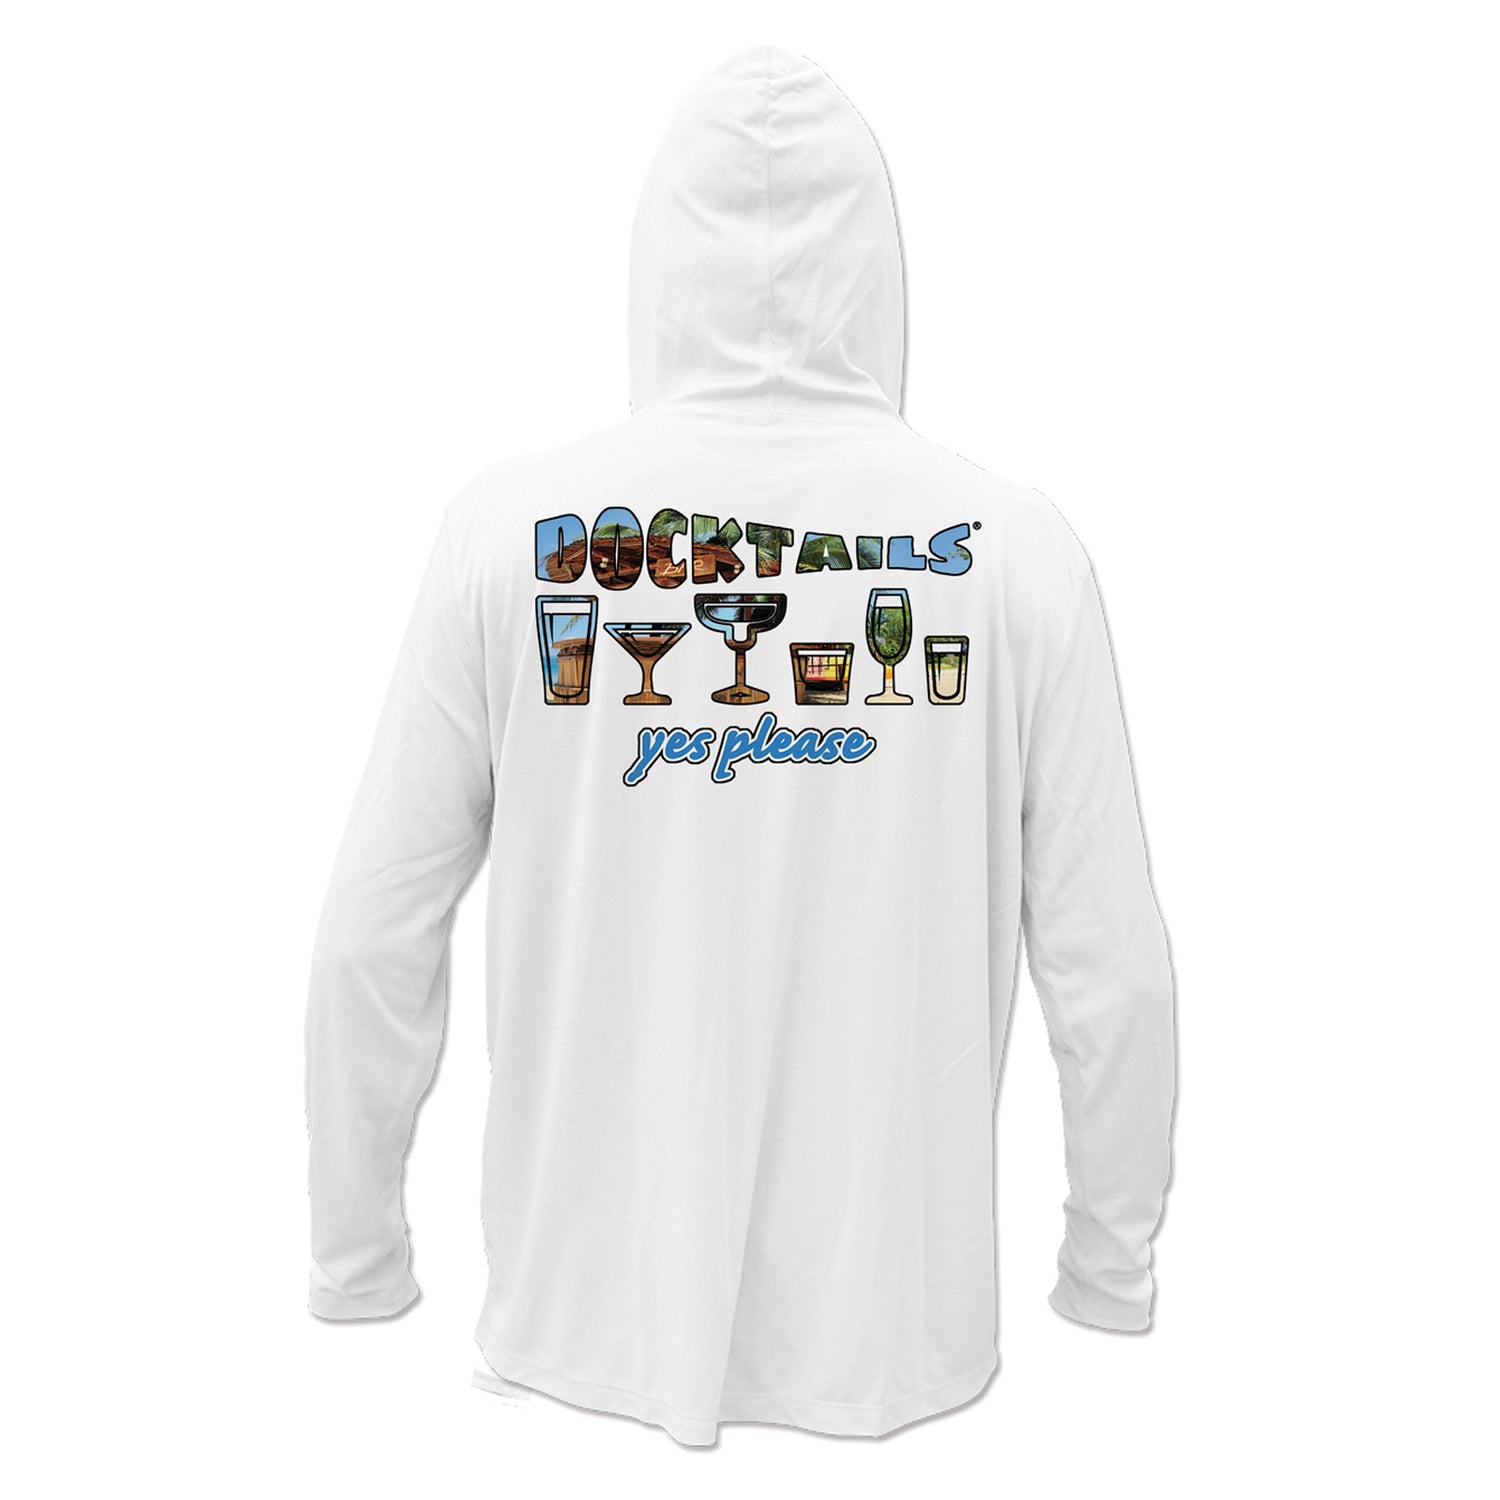 Docktails Drink Like A Fish Unisex Hoodie Performance Sun Shirt in White UPF 50 - back logo